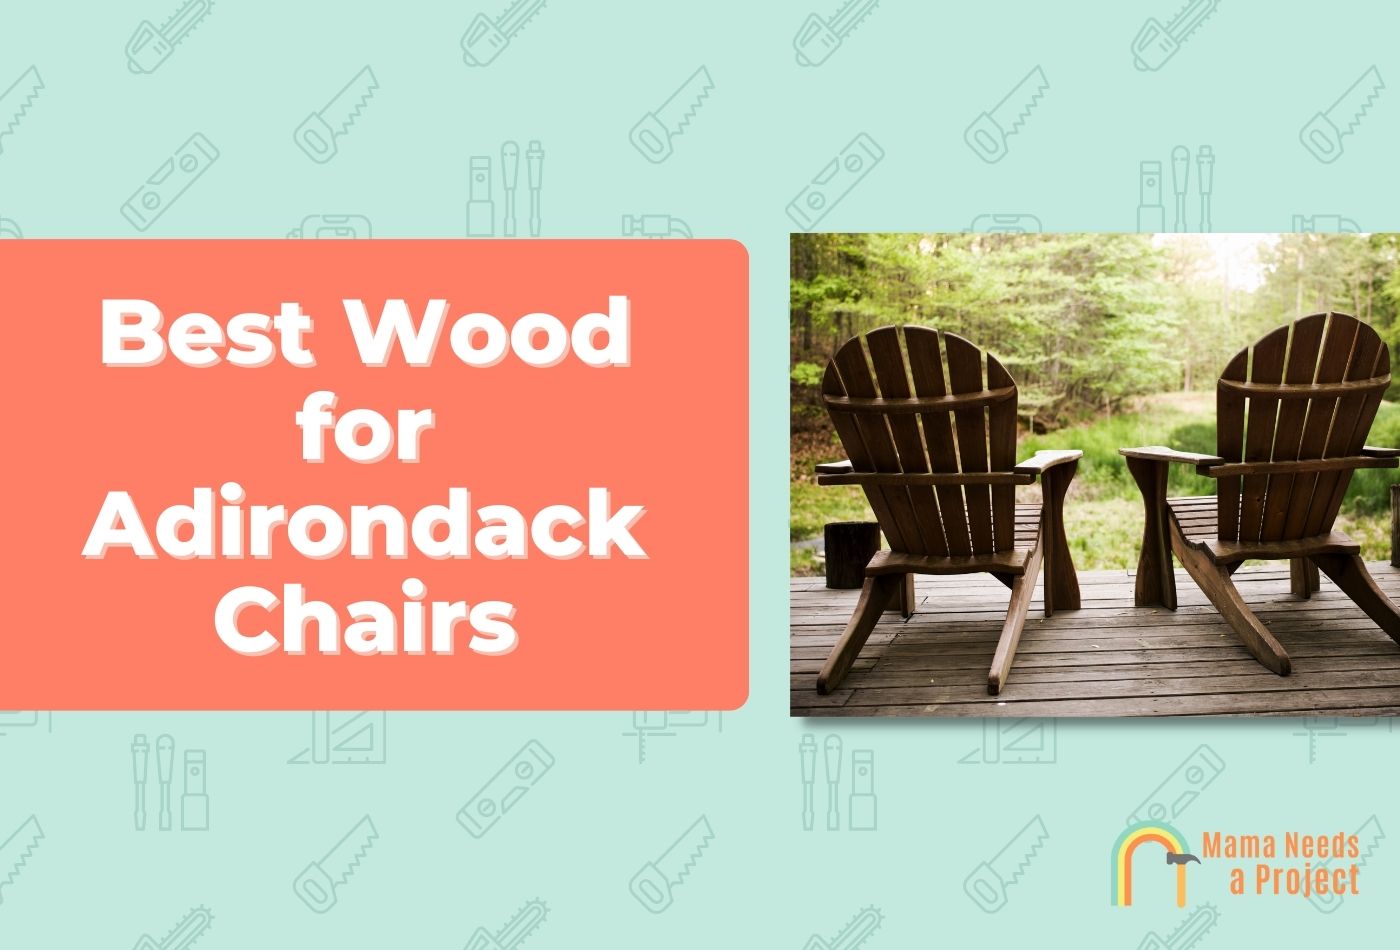 Best Wood for Adirondack Chairs